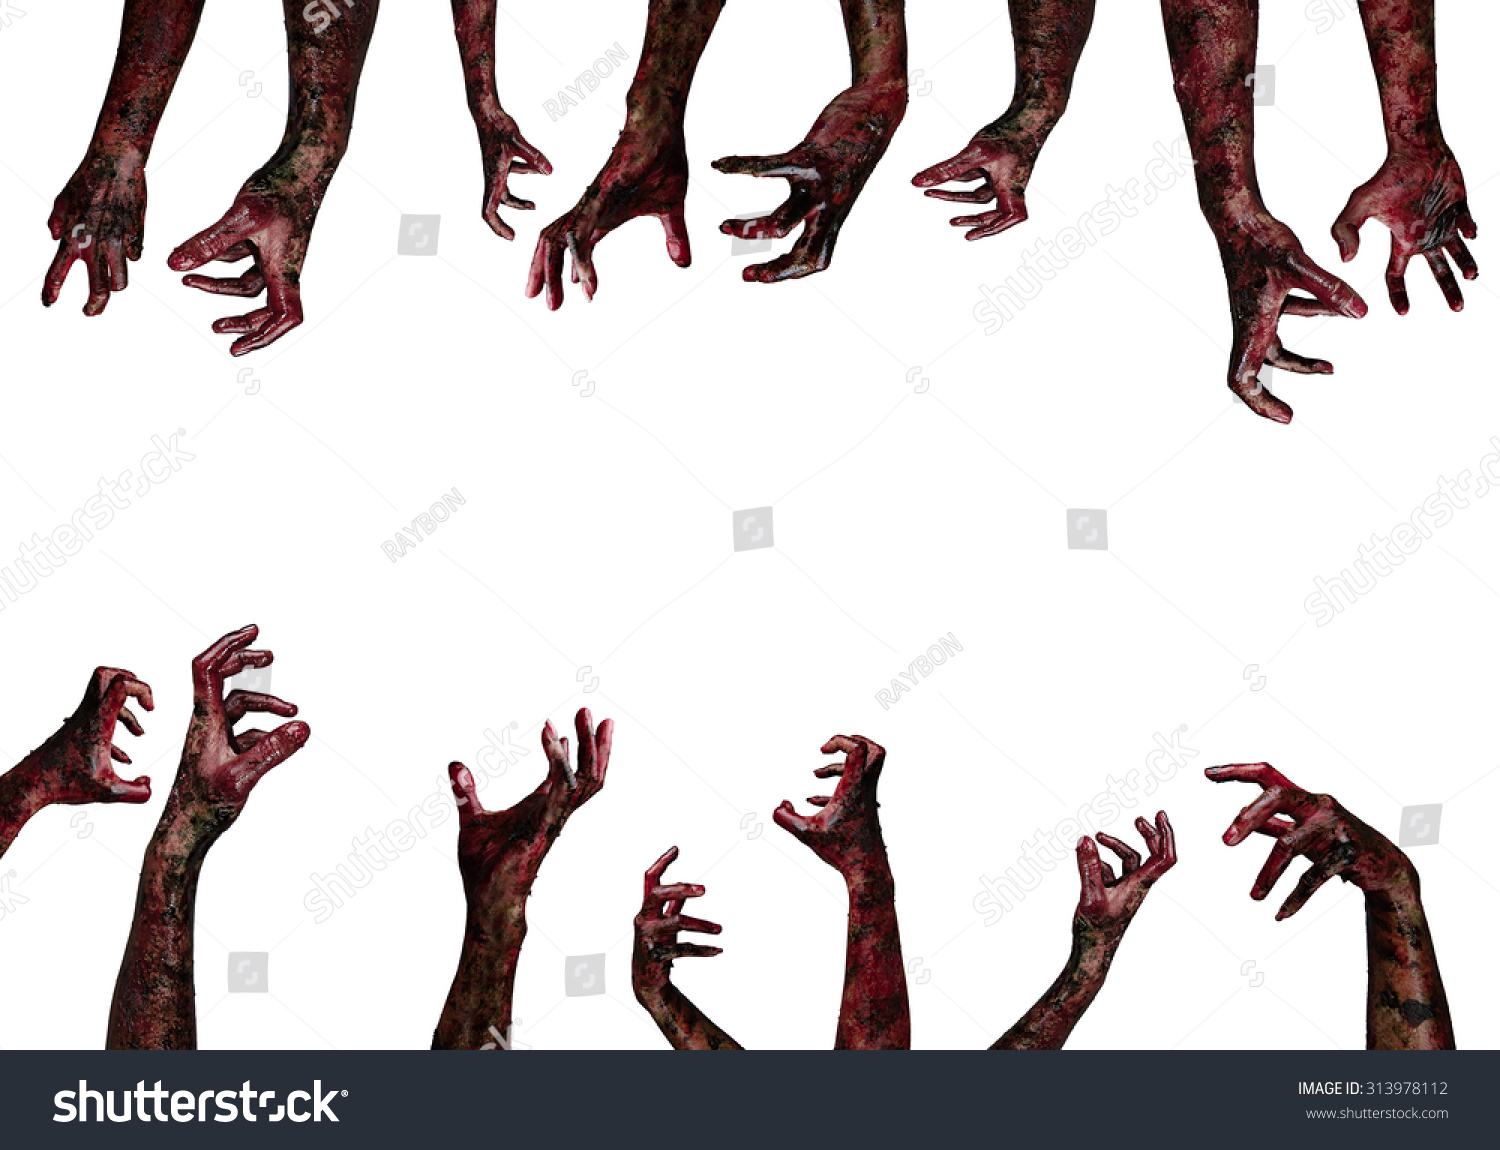 clipart bloody hand - photo #41